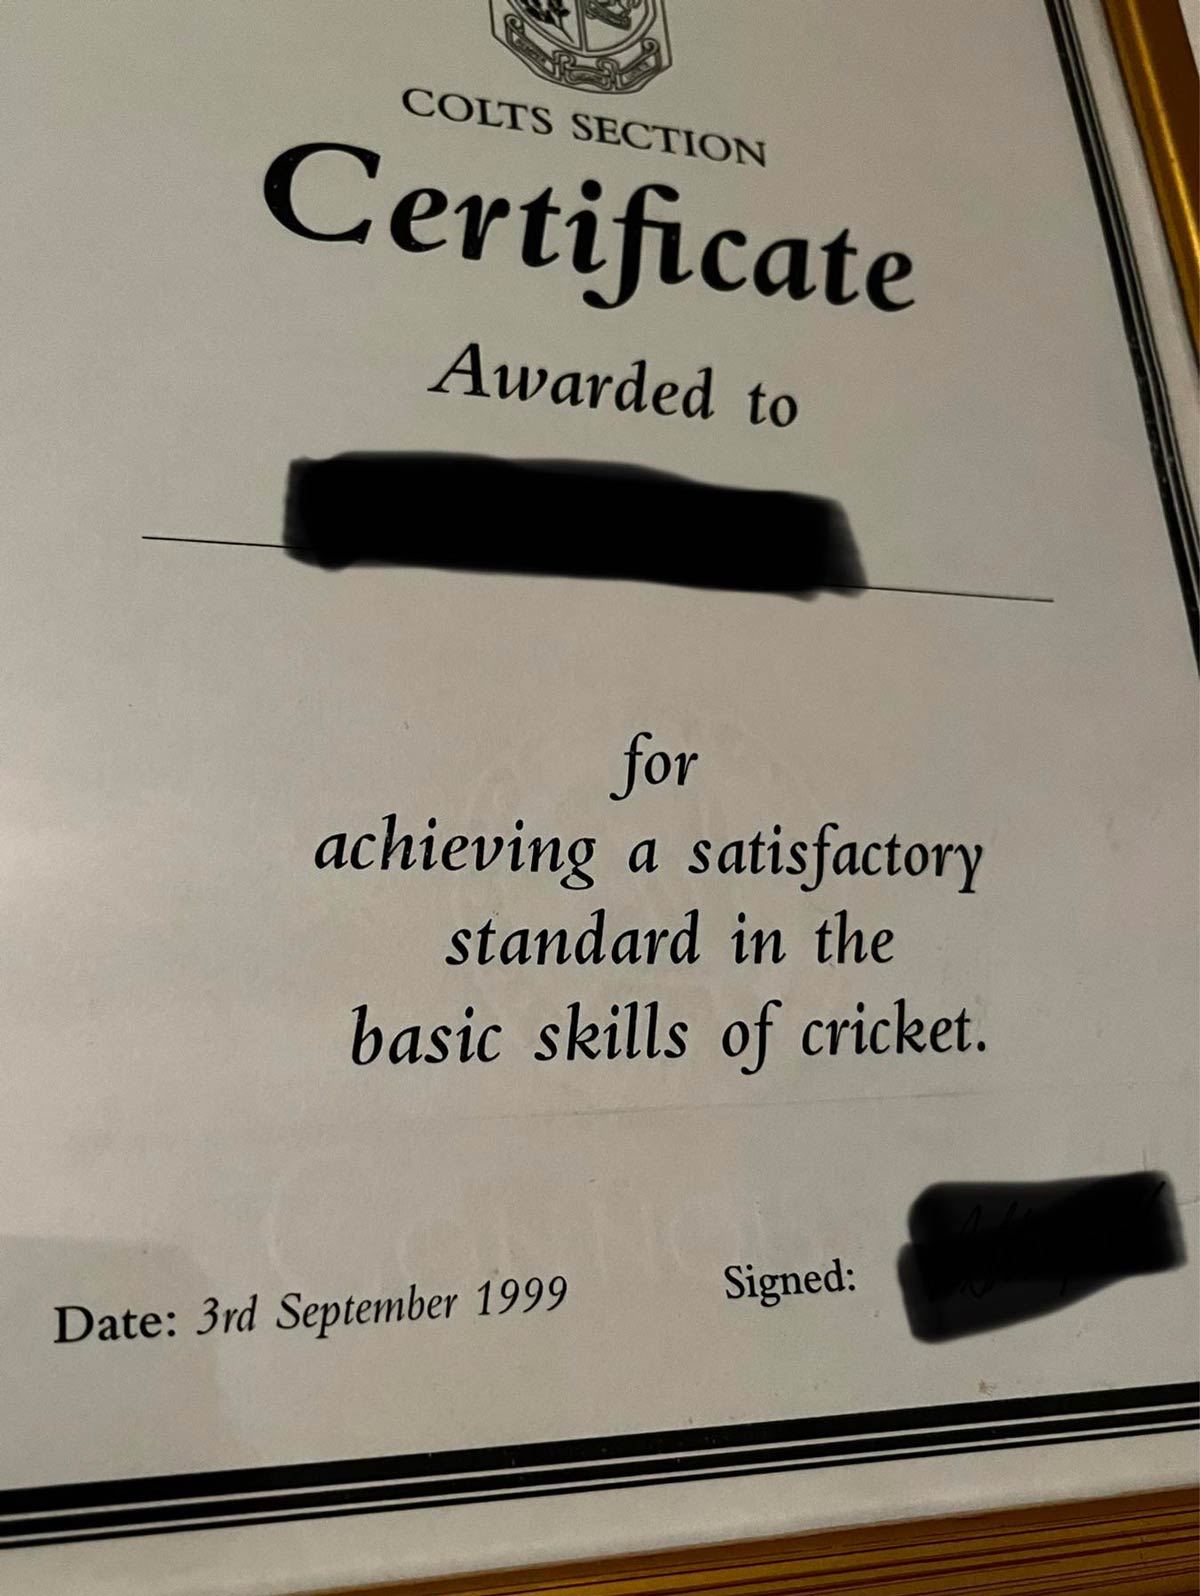 The holy grail of participation awards